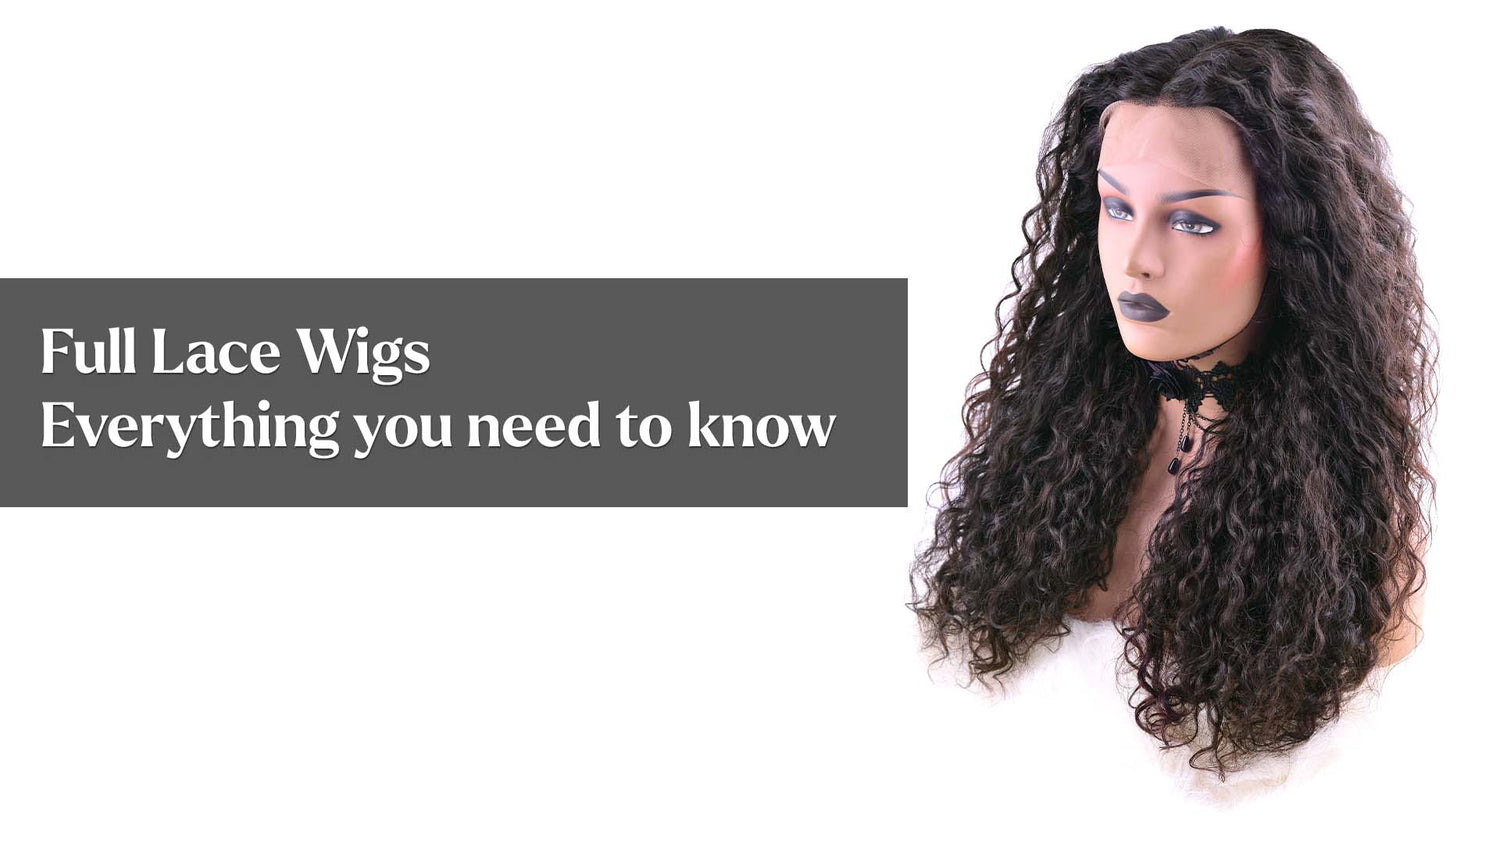 Full Lace Wigs : Everything you need to know